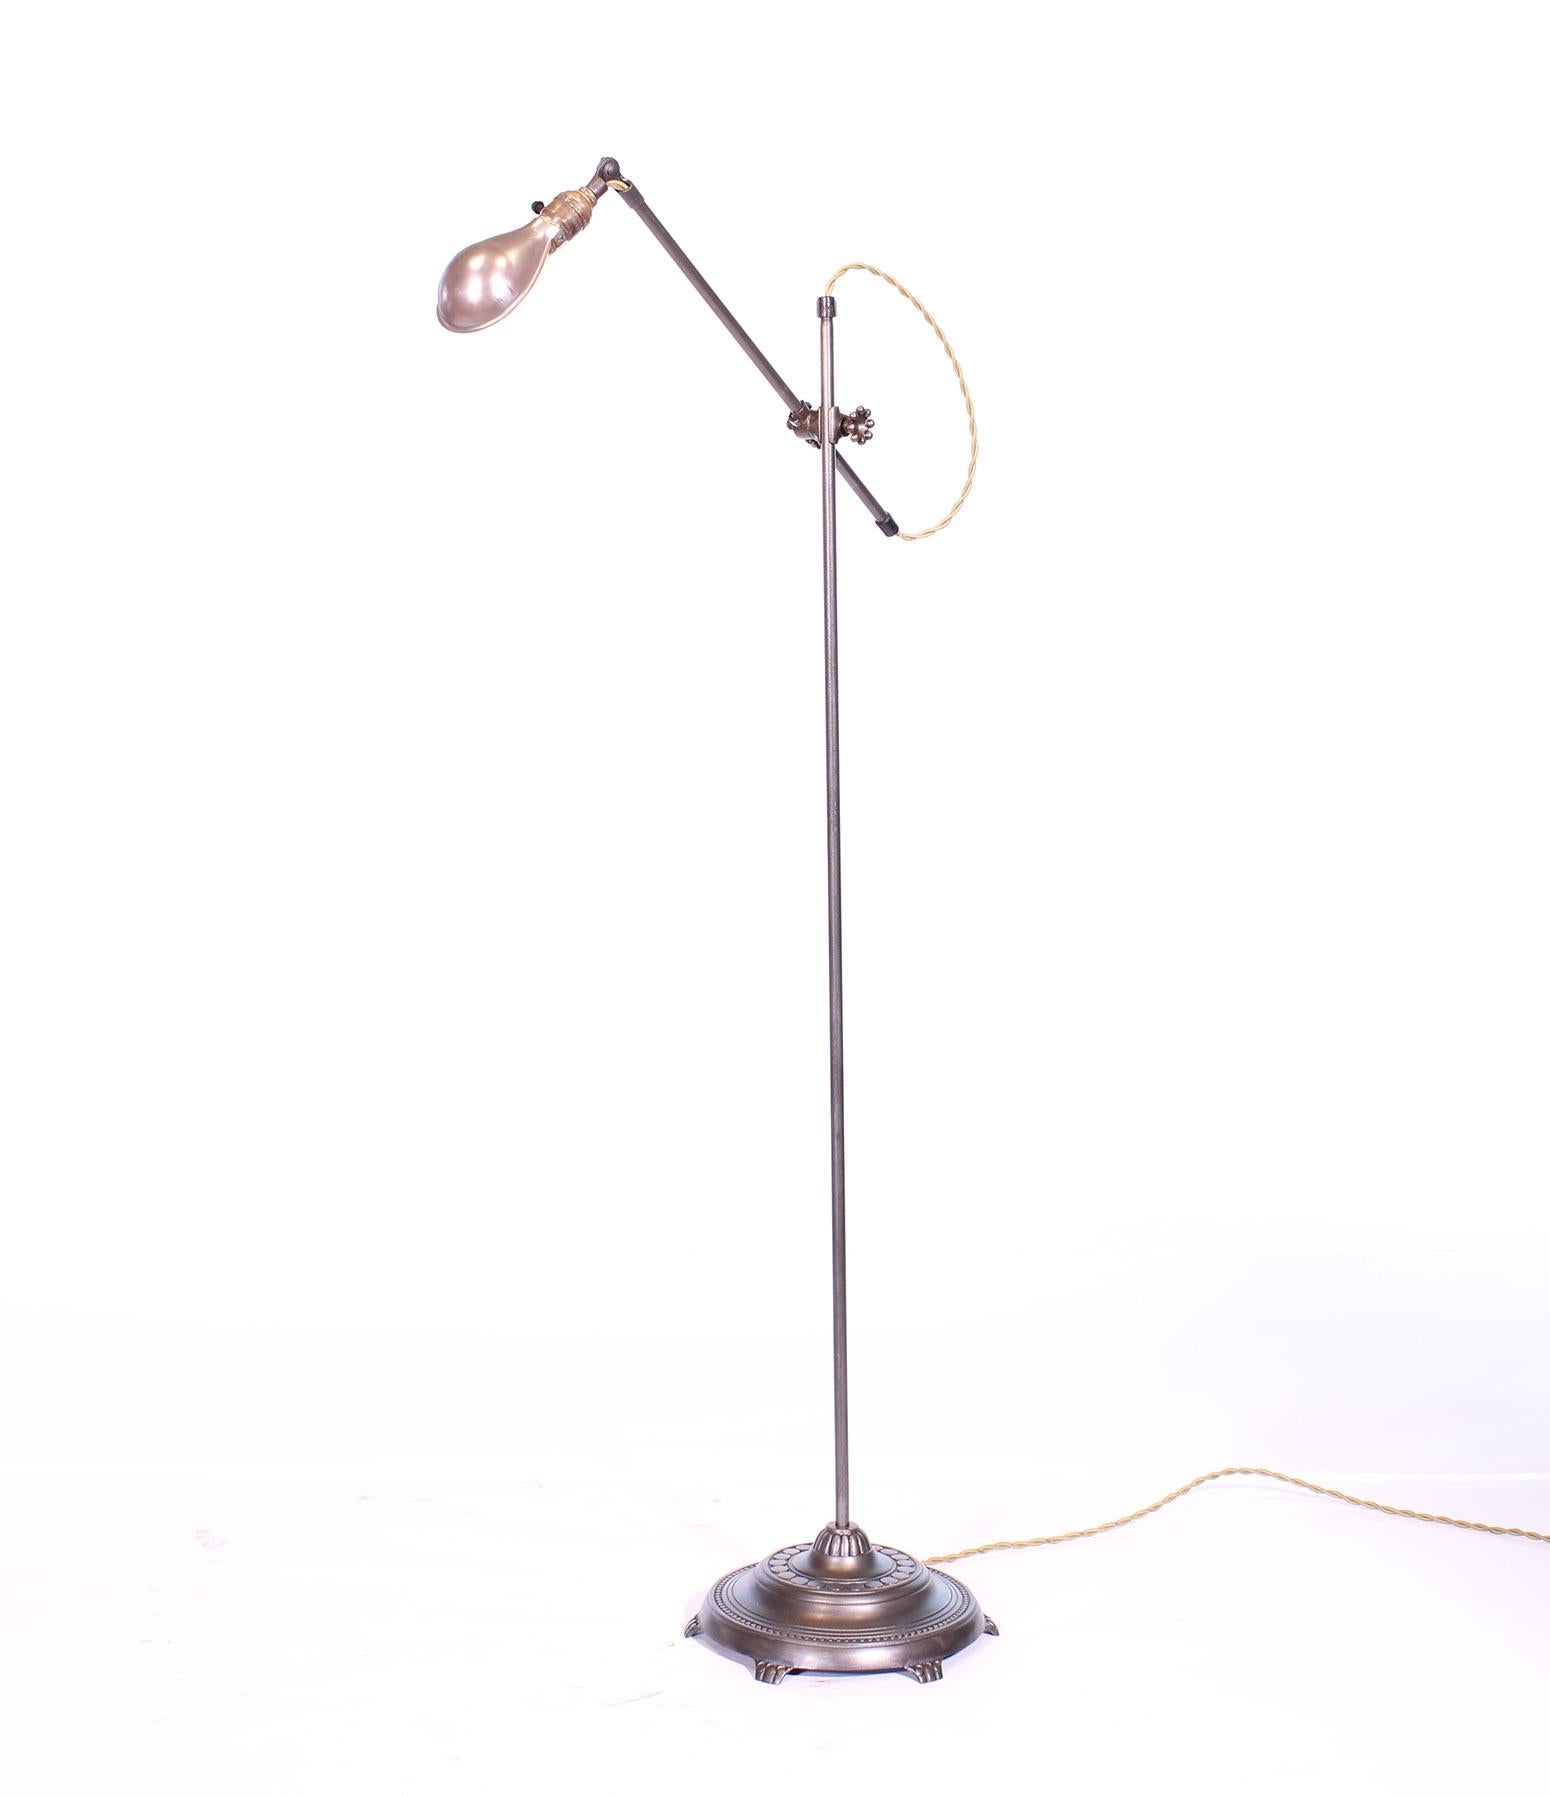 Antique OC white adjustable floor / reading / task lamp with claw foot base and silver shade. Cast iron base measures 12